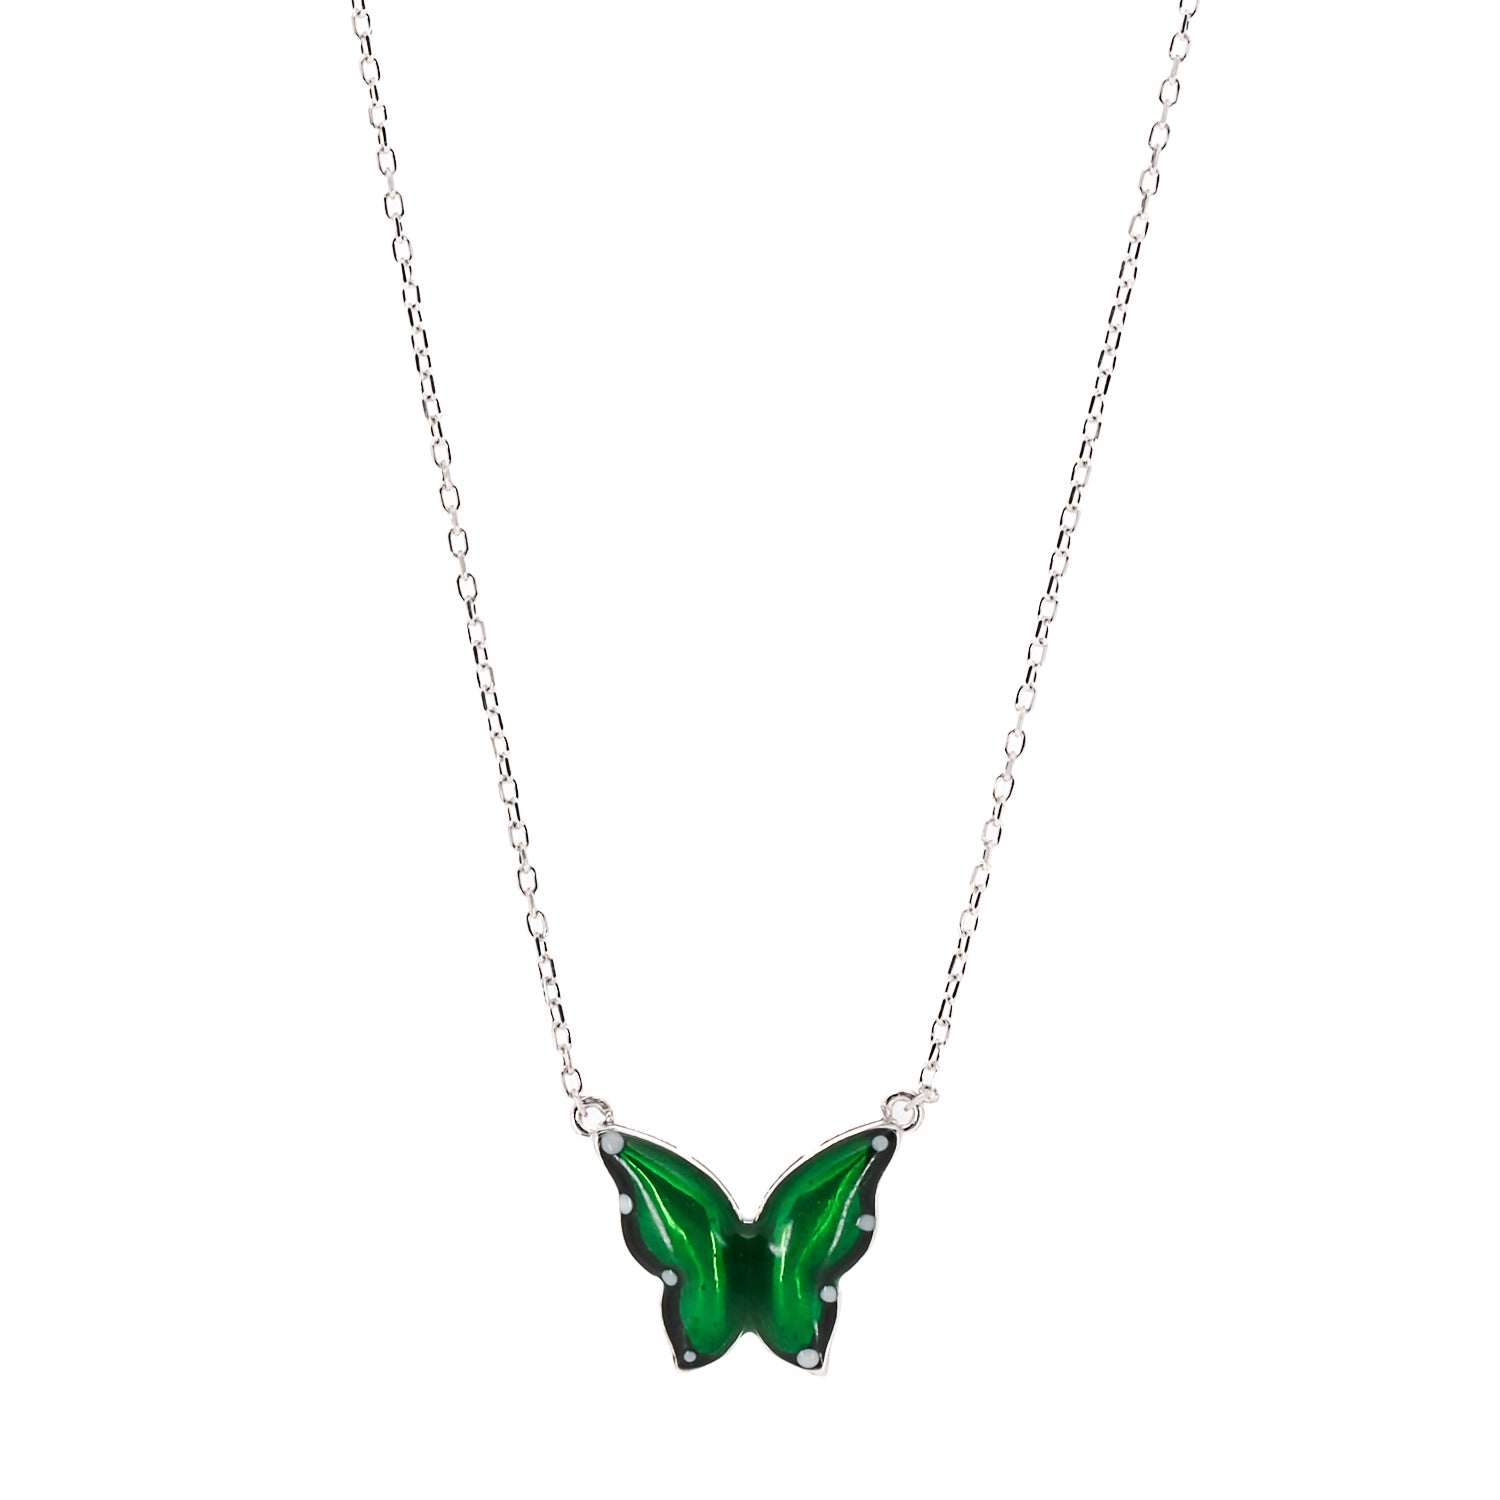 A close-up of the intricate green enamel design on the Silver Abundance Butterfly Necklace.